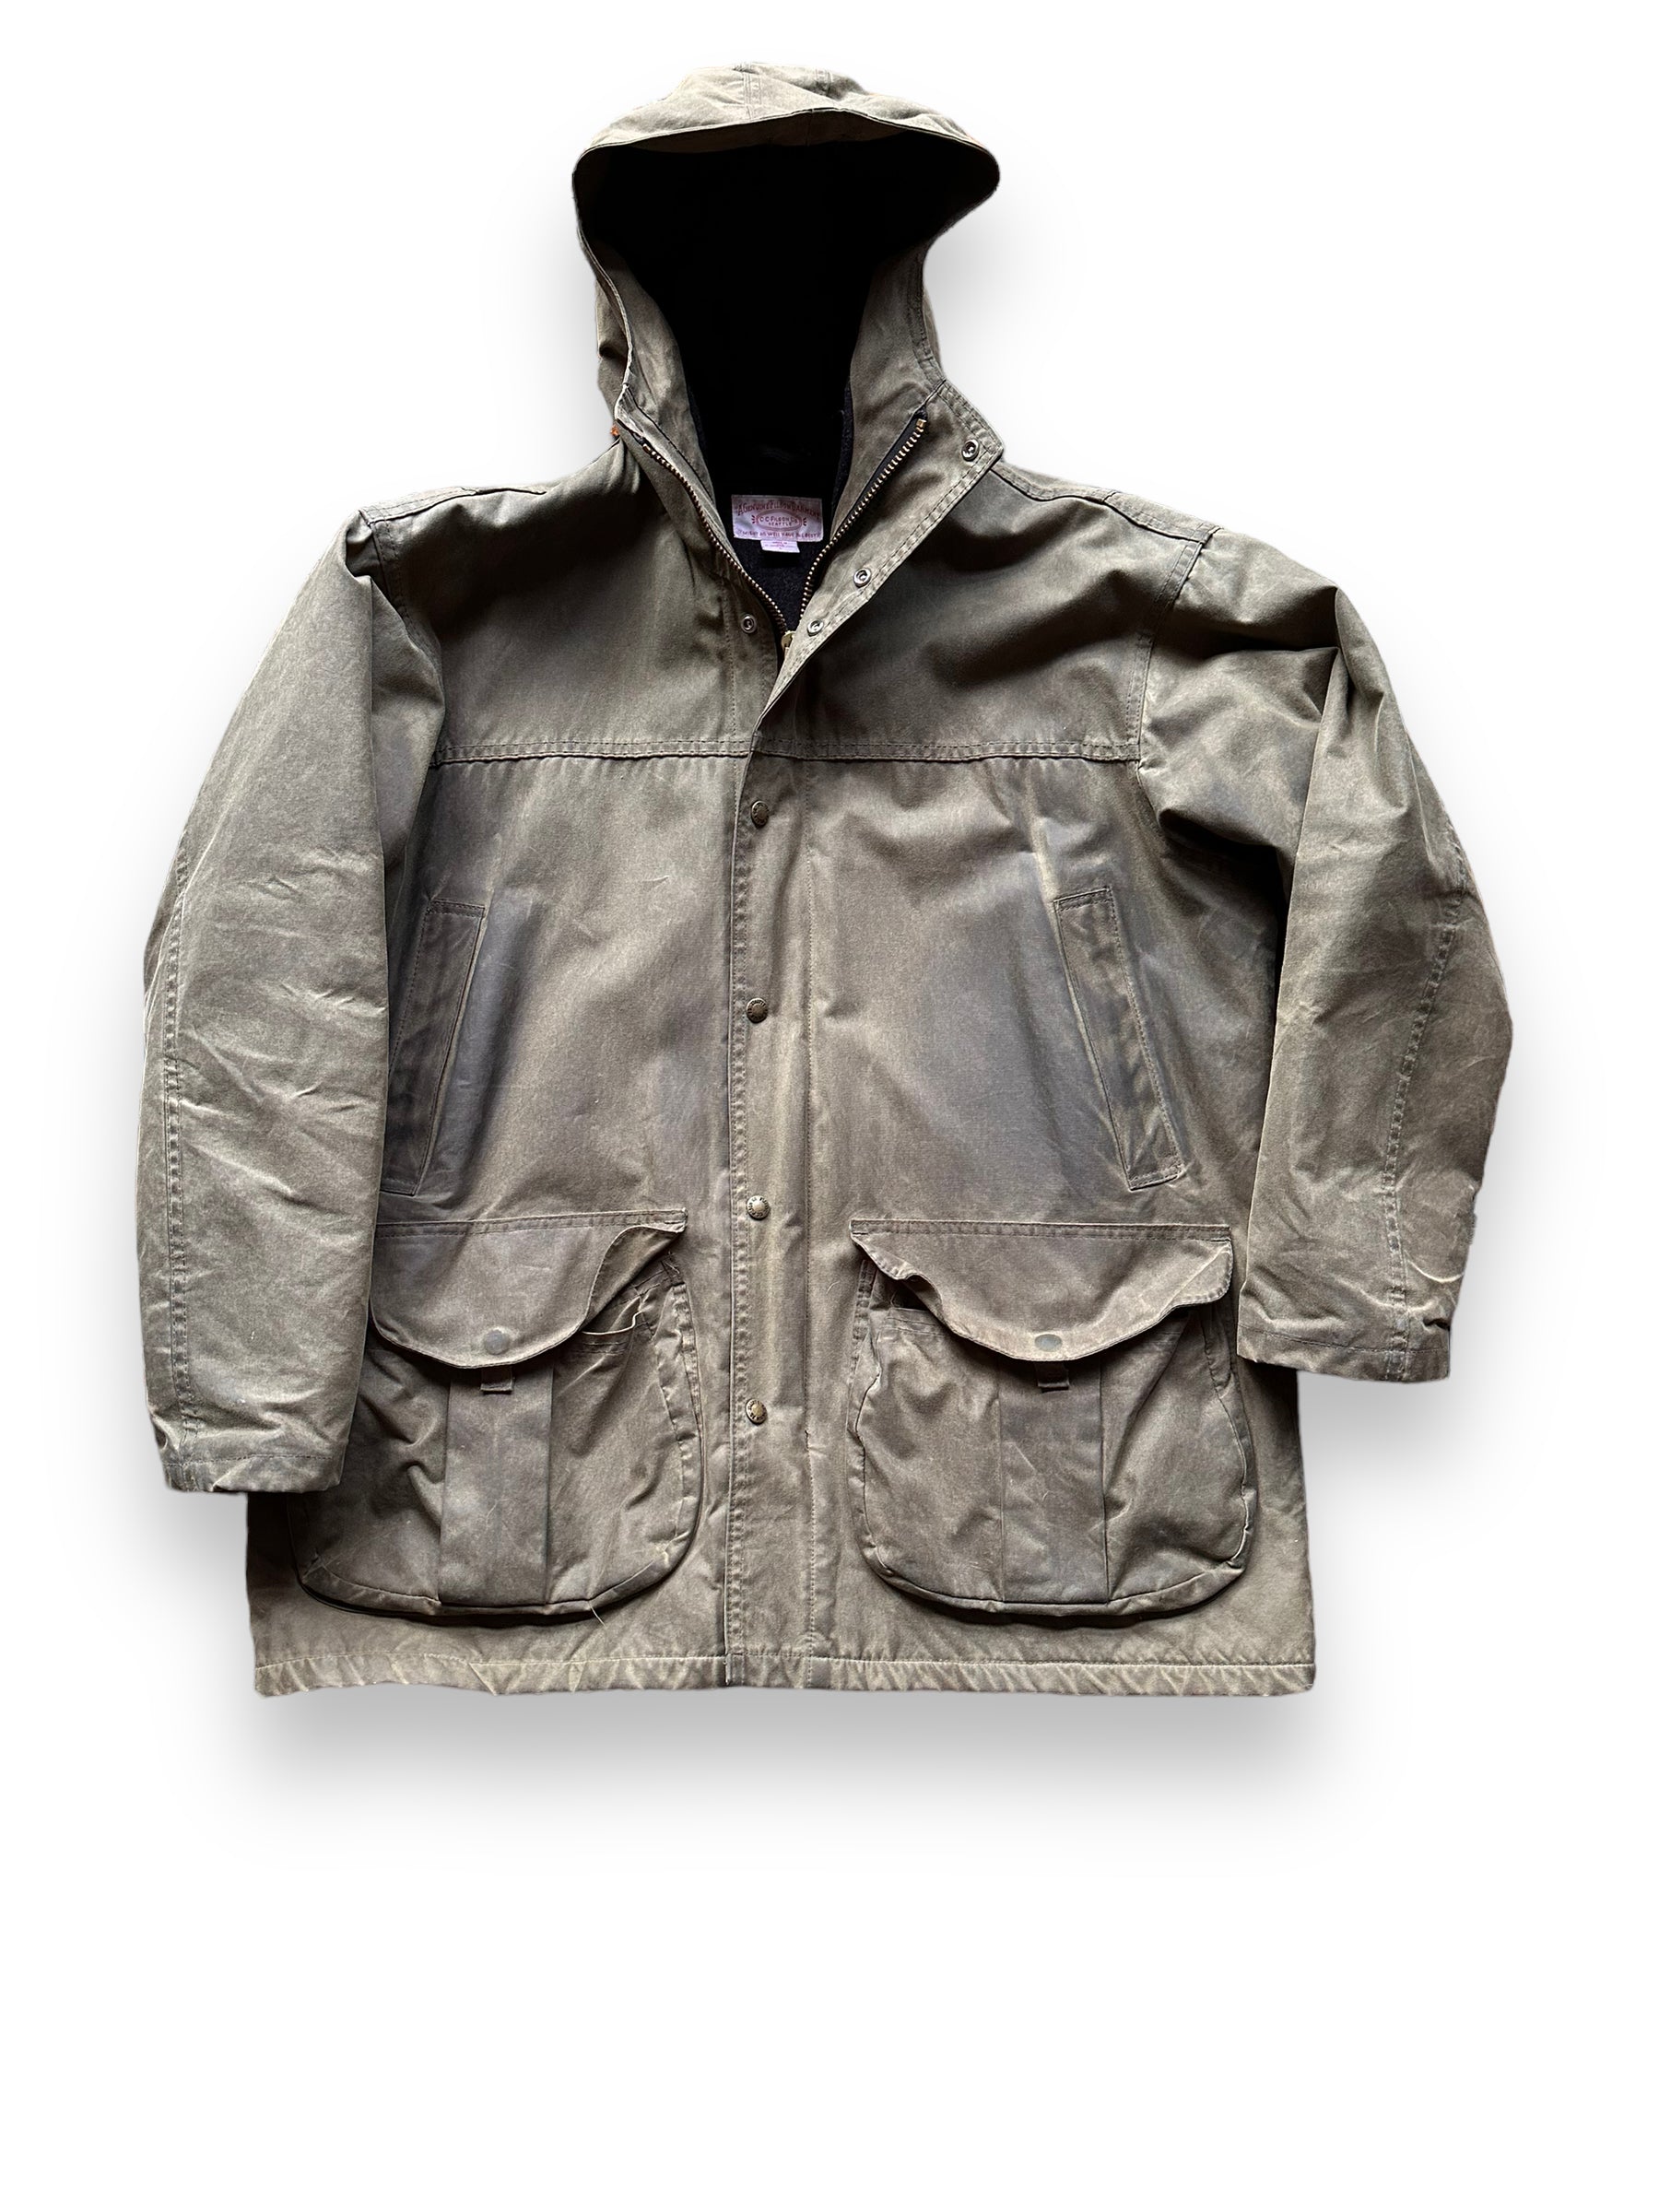 Front View of Filson Foothills Parka SZ L |  Filson Tin Cloth Jackets Seattle | Barn Owl Vintage Clothing Seattle